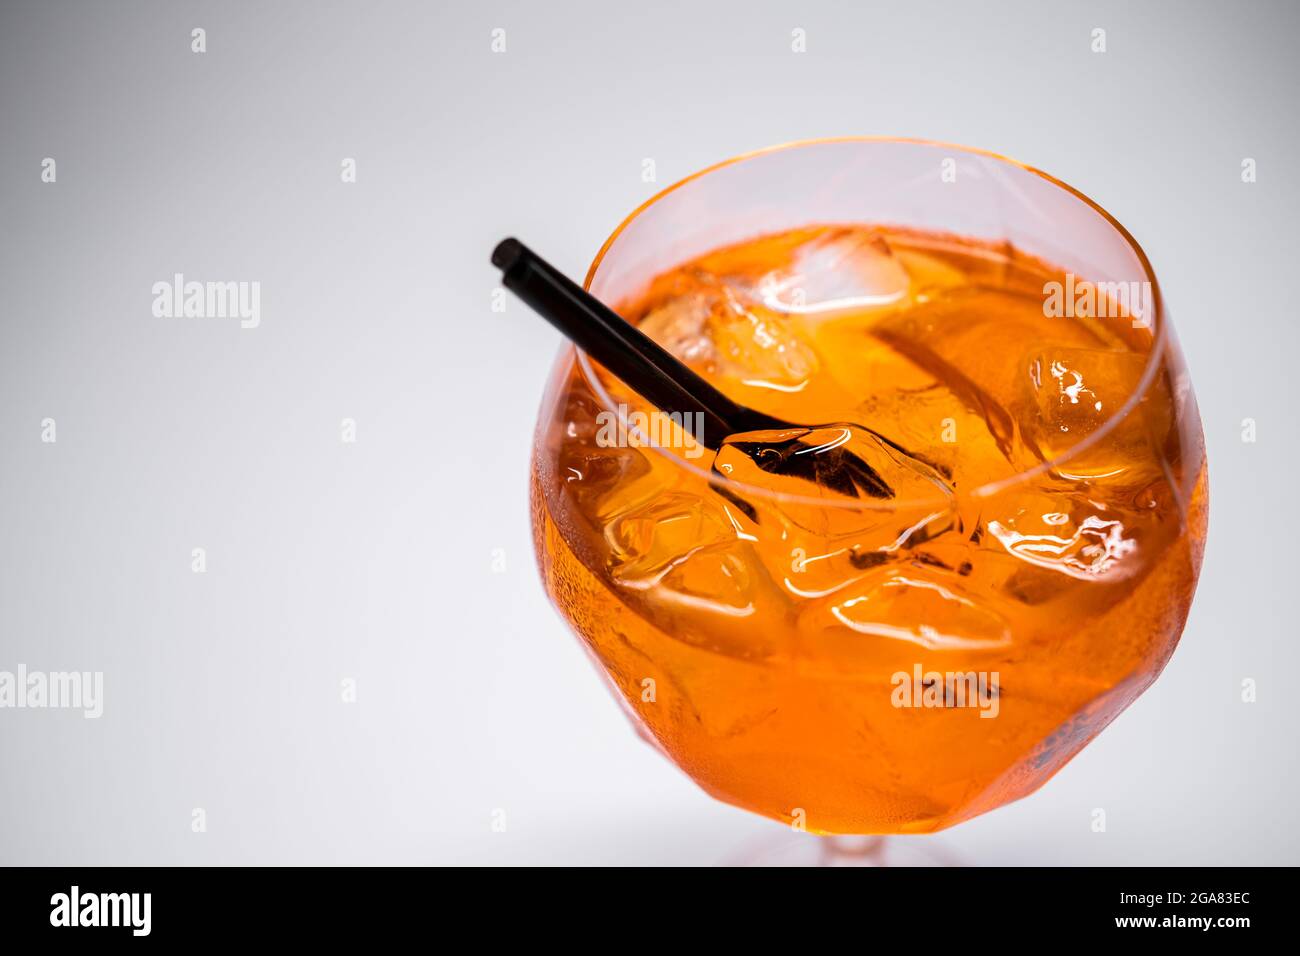 aperol spritz cocktail drink with orange and ice in glass on white background Stock Photo